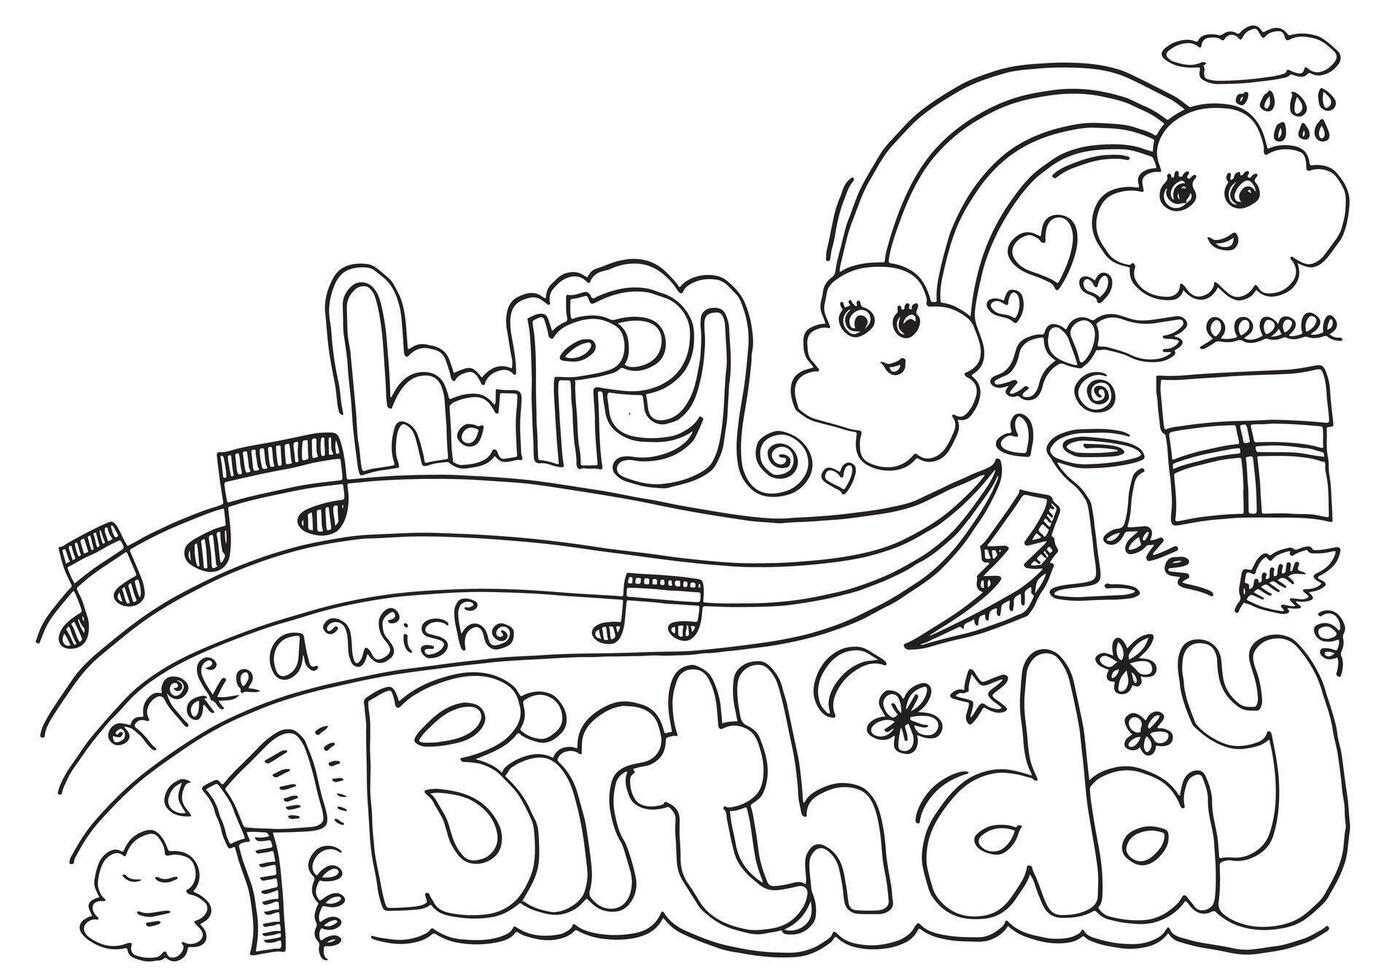 Happy Birthday lettering text banner with clouds, heart, gifts, musical notes black color. Vector illustration.